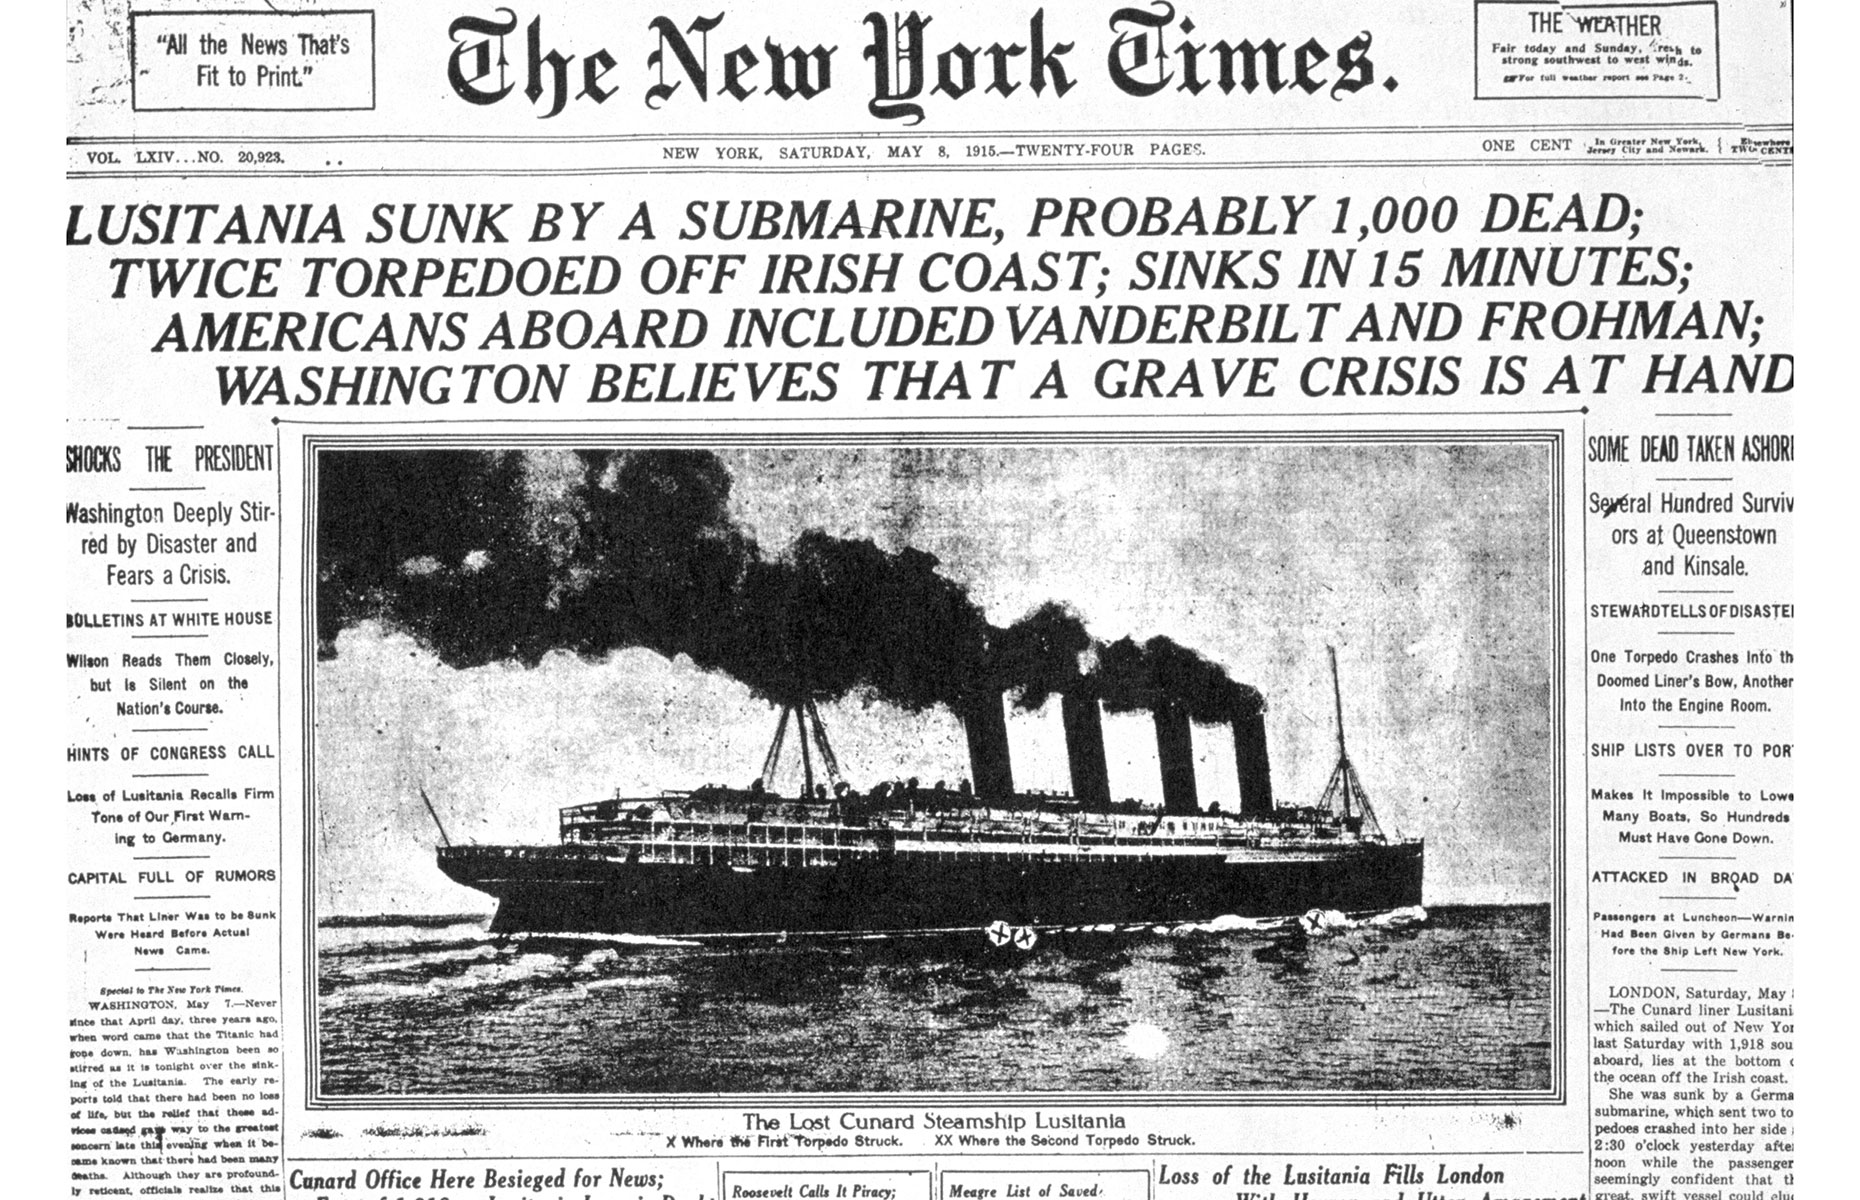 Front page of the New York Times with the original news story from May 2015 about the sinking of the liner Lusitania (Image: MPI/Getty Images)